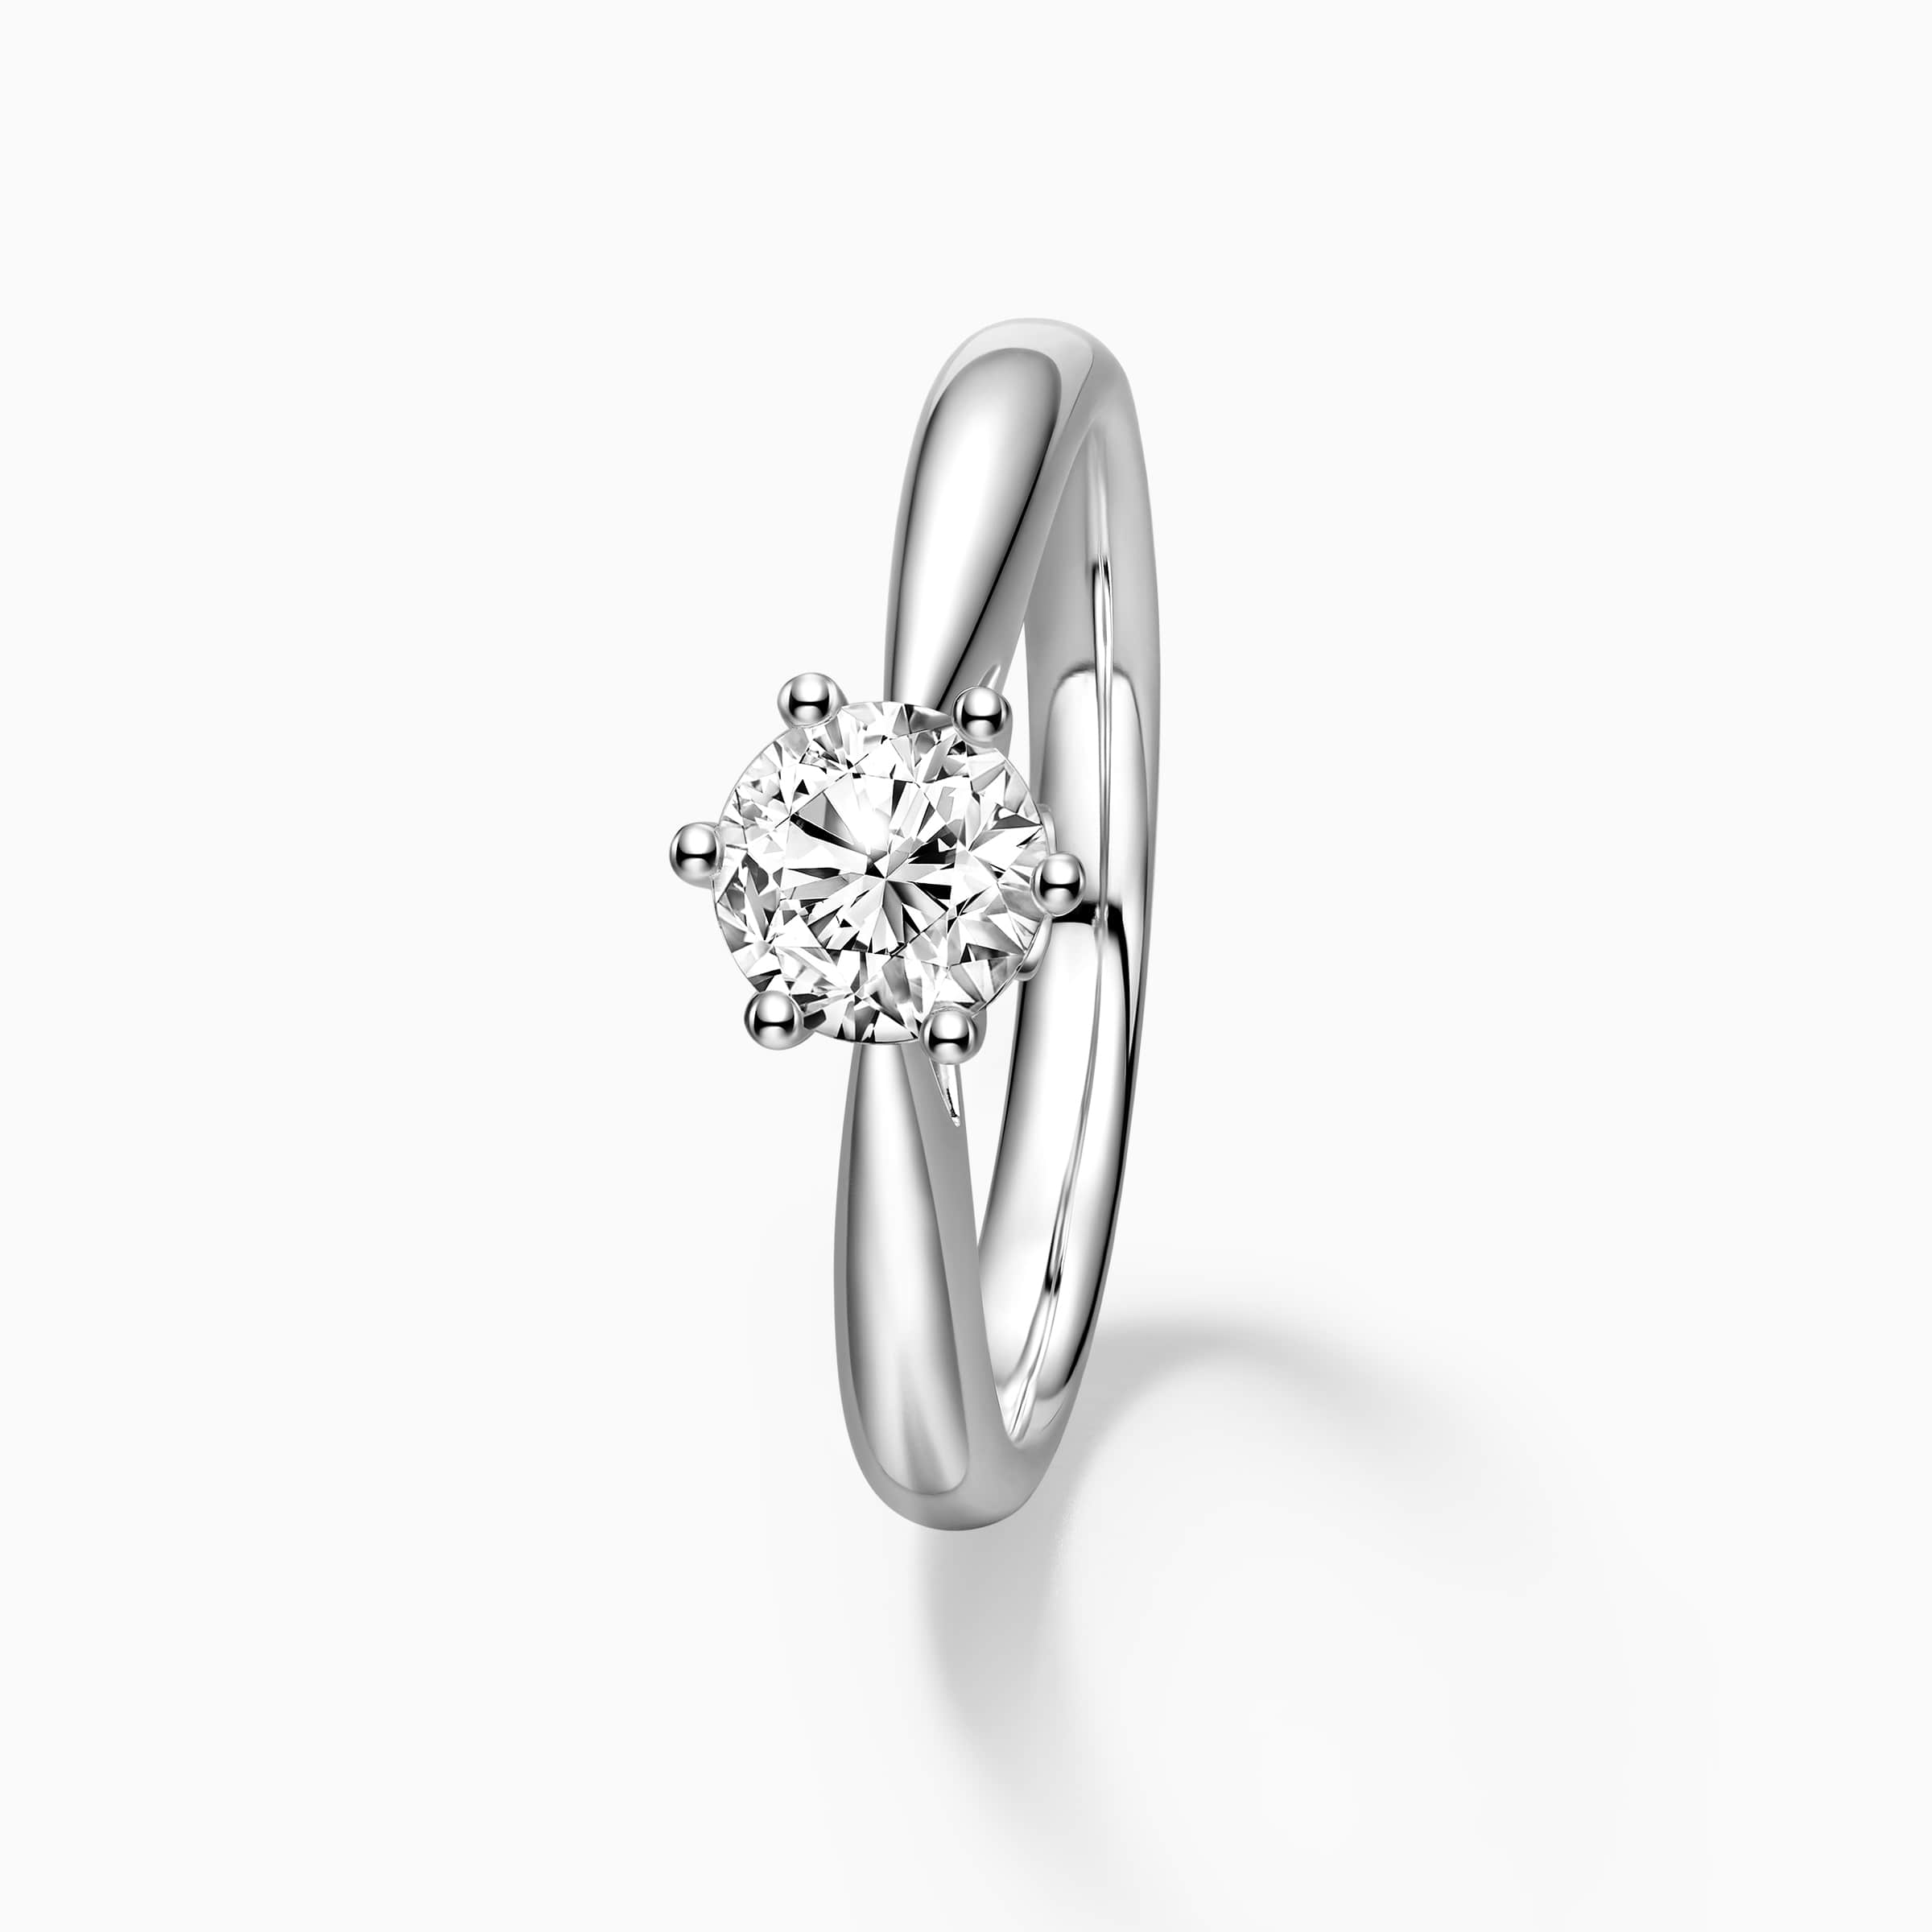 DR Love Mark 6 prong engagement ring